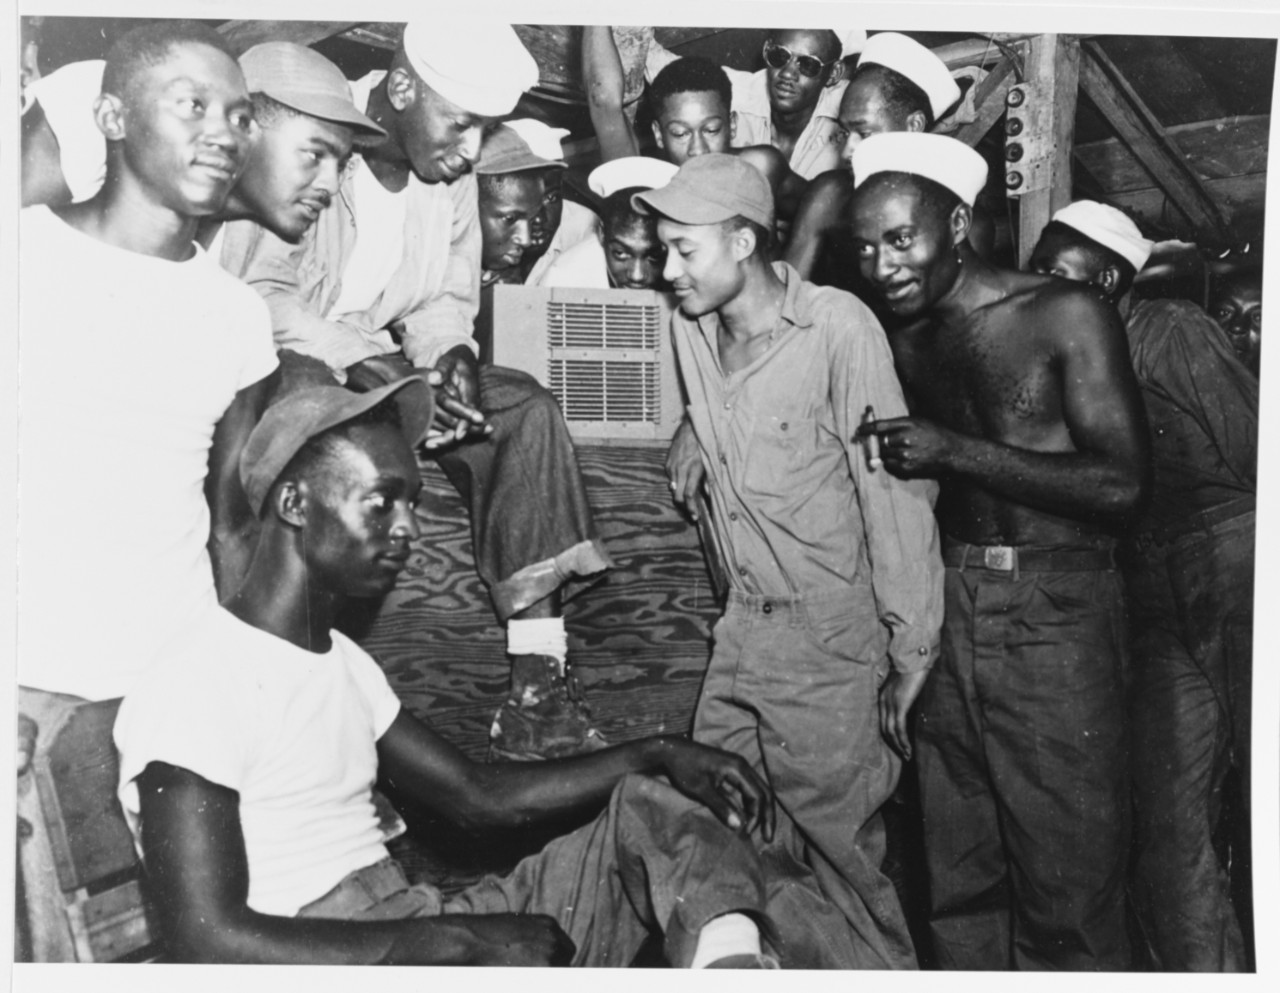 Photo #: 80-G-338464  Peace Celebrations at Naval Amphibious Base, Manus, Admiralty Islands, 15 August 1945